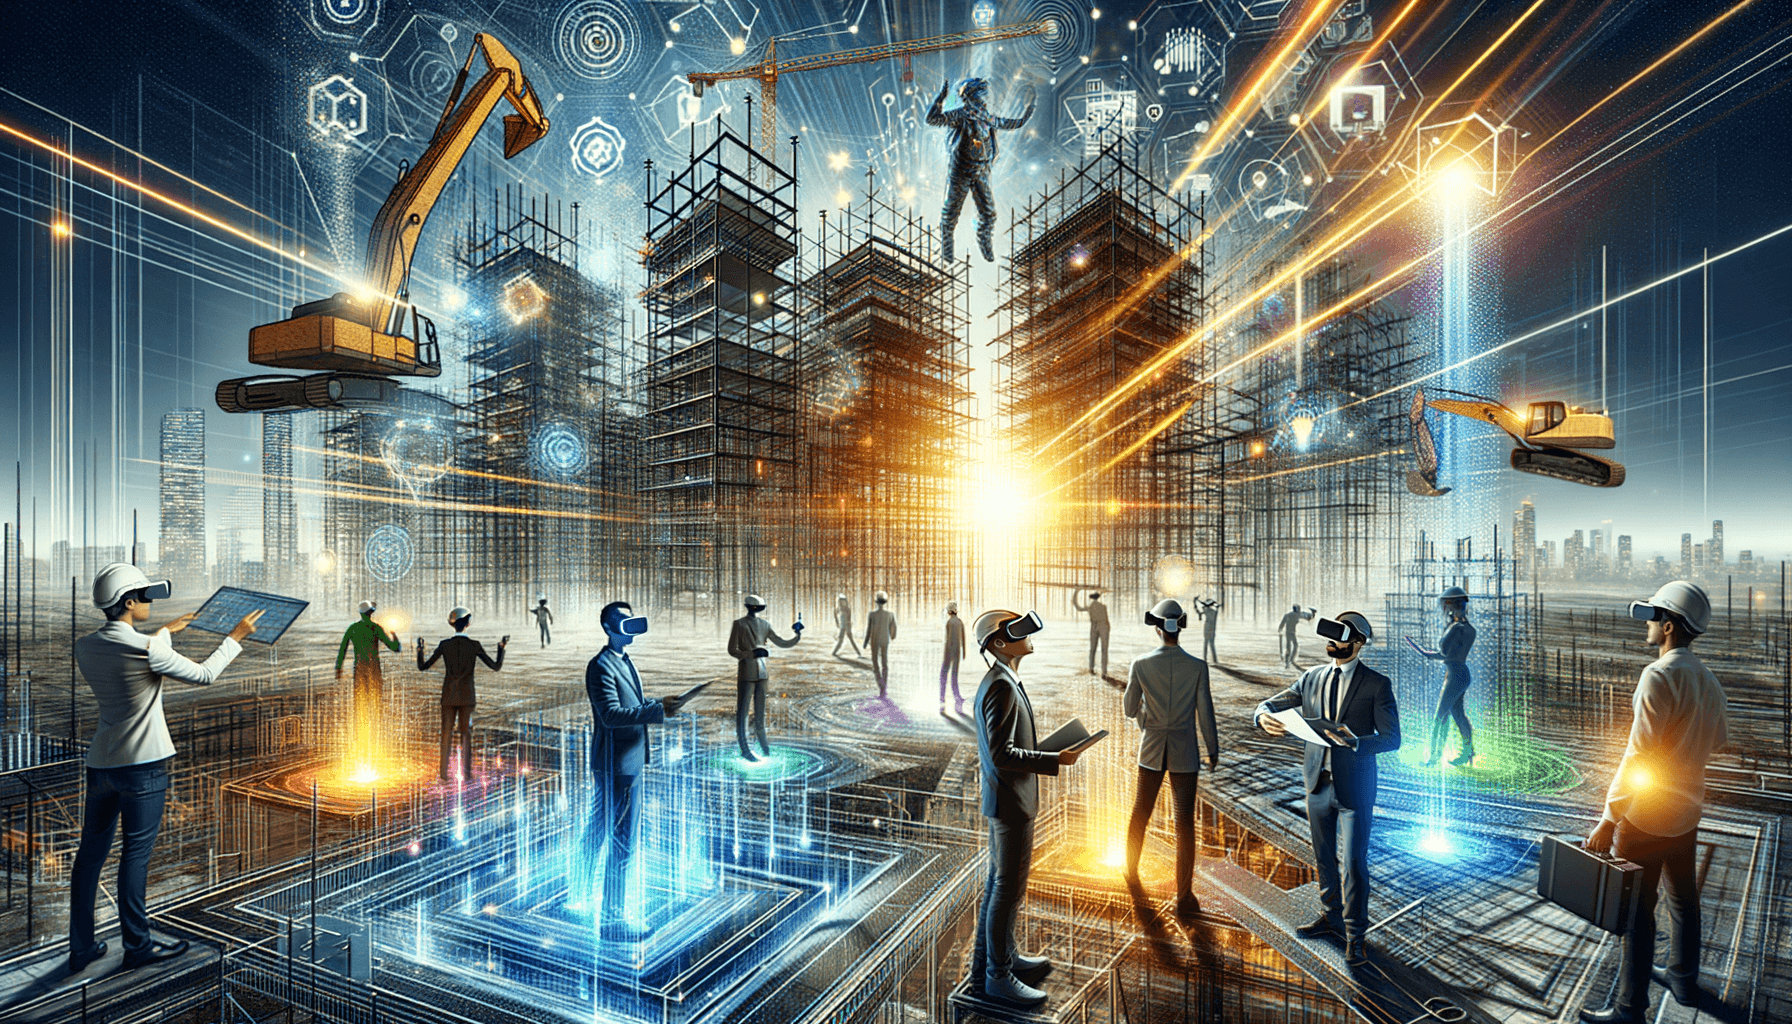 "Revolutionizing Construction: Explore Virtual Reality Tours and Augmented Reality Integration with Gravity Jack's Innovative Solutions—Enabling Informed Decisions and Industry Growth. #ConstructionTech #VR #AR"